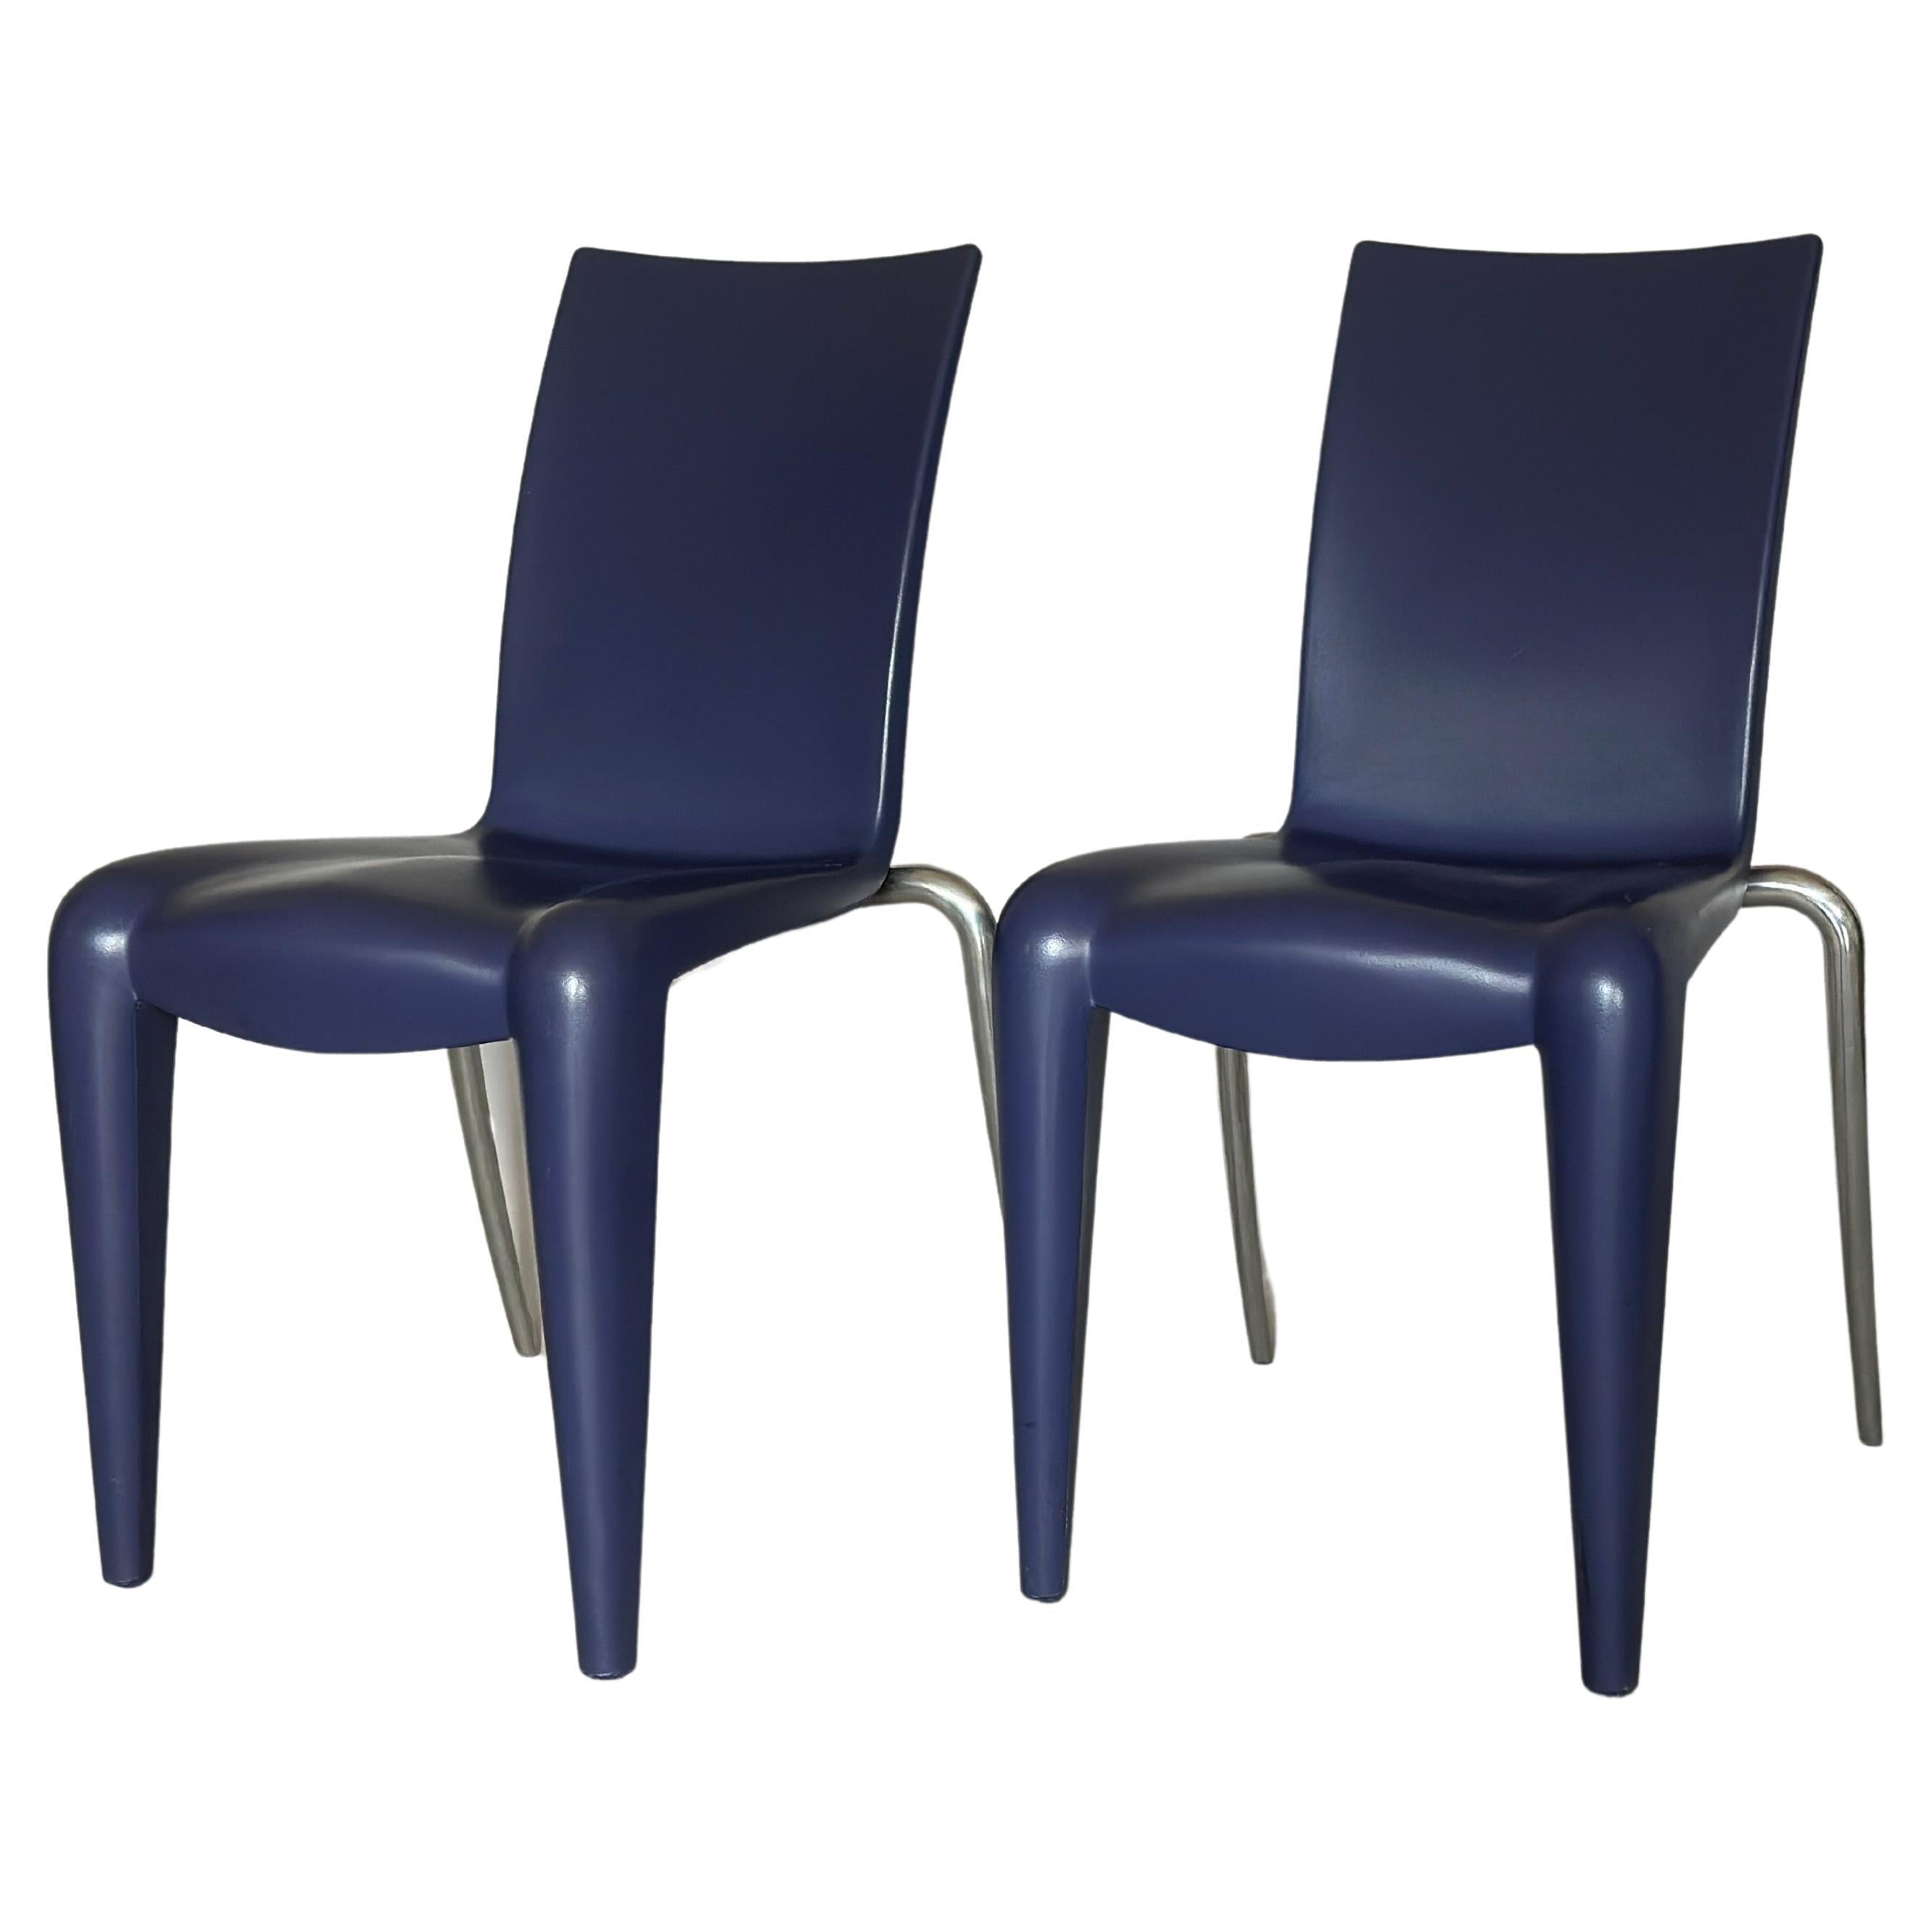 Blue Chair Louis 20 by Philipe Starck for Vitra, circa 1990s